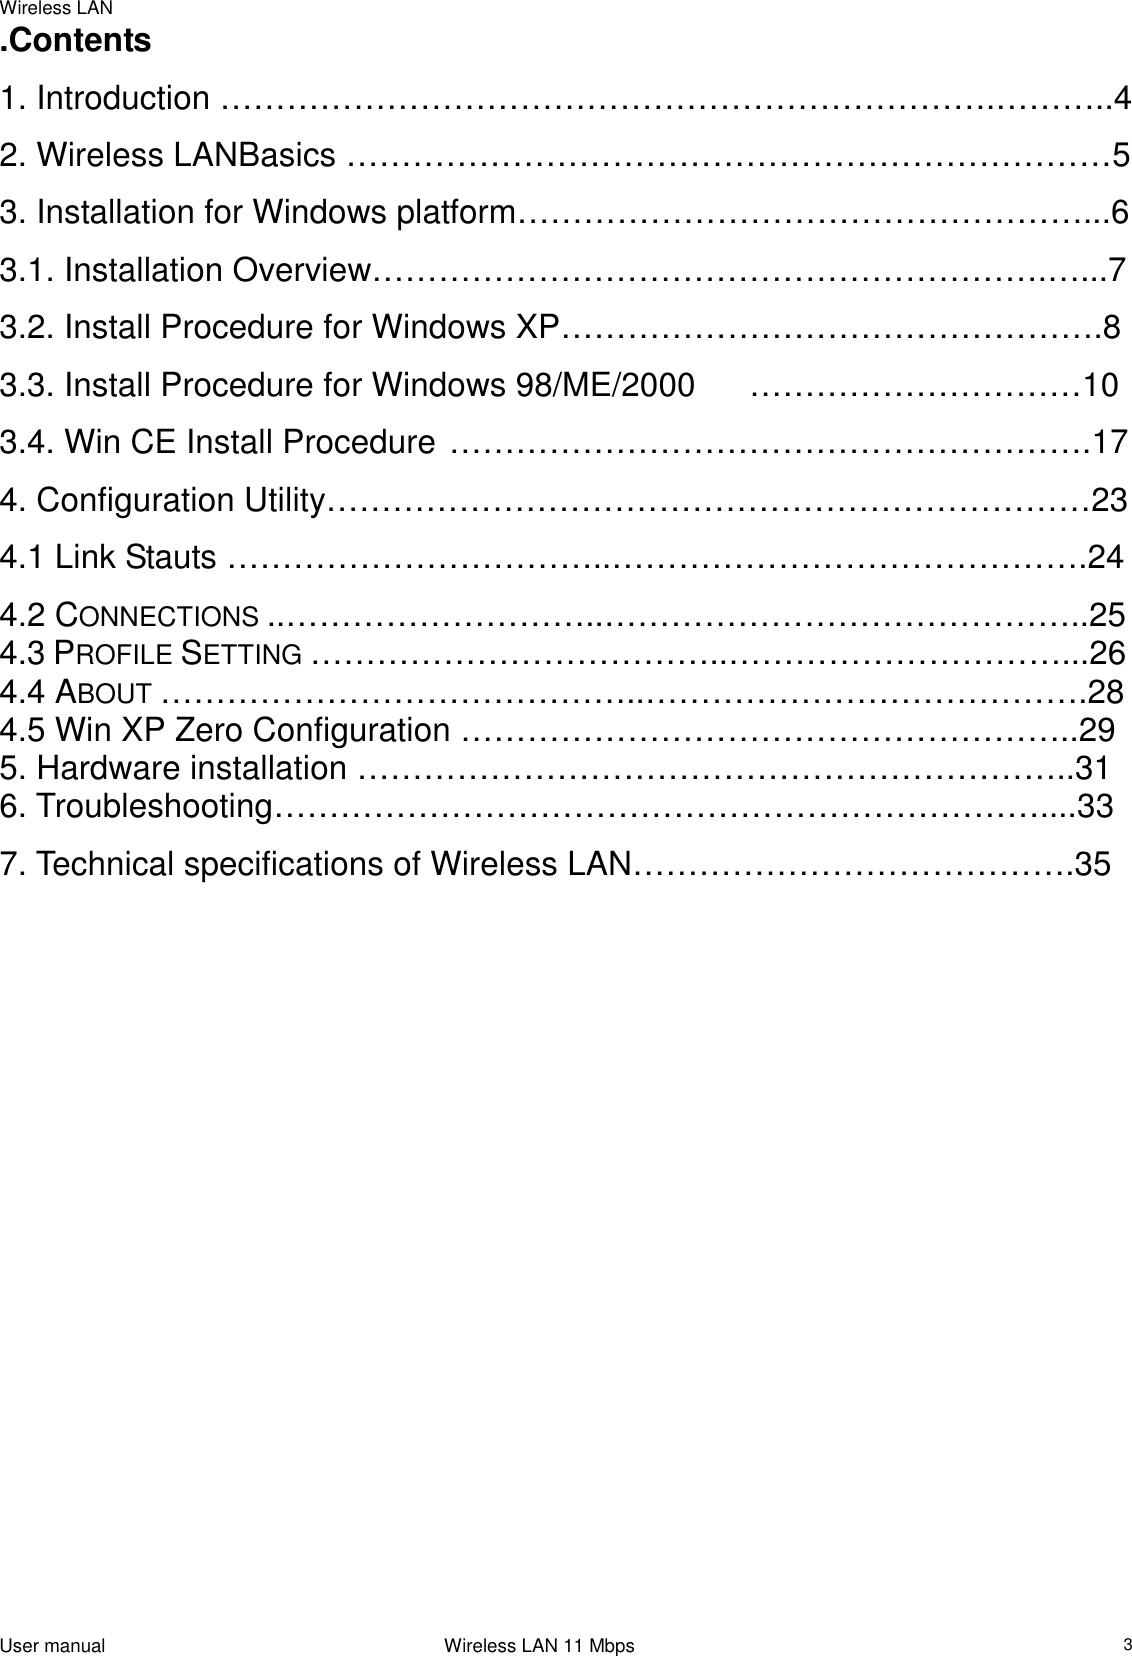 Wireless LANUser manual                                                                 Wireless LAN 11 Mbps3.Contents1. Introduction …………………………………………………………….………..42. Wireless LANBasics ……………………………………………………………53. Installation for Windows platform……………………………………………...63.1. Installation Overview…………………………………………………….…...73.2. Install Procedure for Windows XP………………………………………….83.3. Install Procedure for Windows 98/ME/2000 …………………………103.4. Win CE Install Procedure ………………………………………………….174. Configuration Utility……………………………………………………………234.1 Link Stauts ……………………………..…………………………………….244.2 CONNECTIONS ..………………………..……………………………………..254.3 PROFILE SETTING ………………………………..…………………………...264.4 ABOUT ……………………………………..………………………………….284.5 Win XP Zero Configuration ………………………………………………..295. Hardware installation ………………………………………………………..316. Troubleshooting……………………………………………………………....337. Technical specifications of Wireless LAN………………………………….35